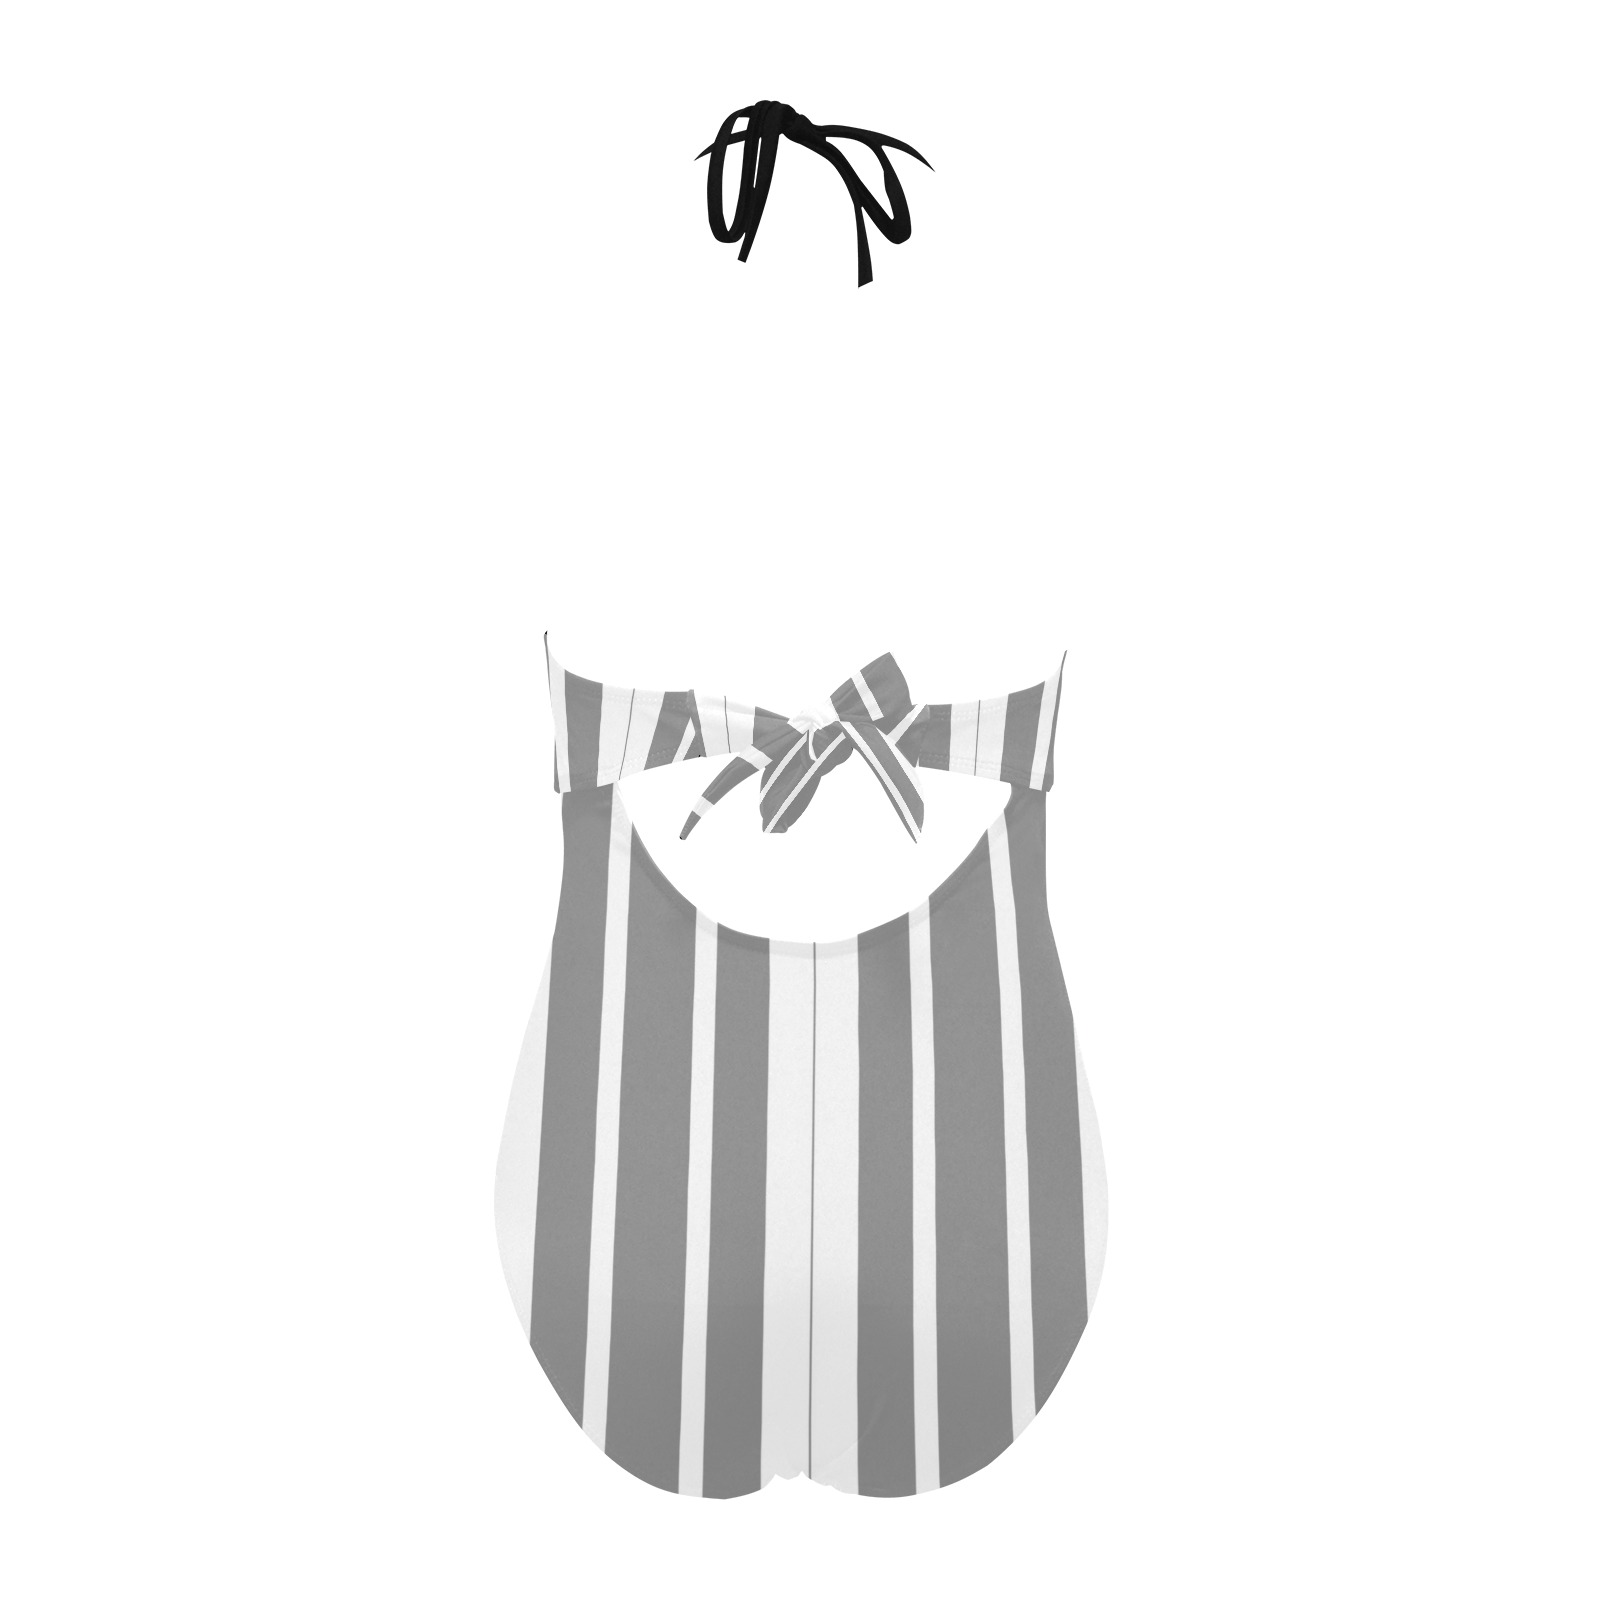 Gray and White Stripes Backless Hollow Out Bow Tie Swimsuit (Model S17)